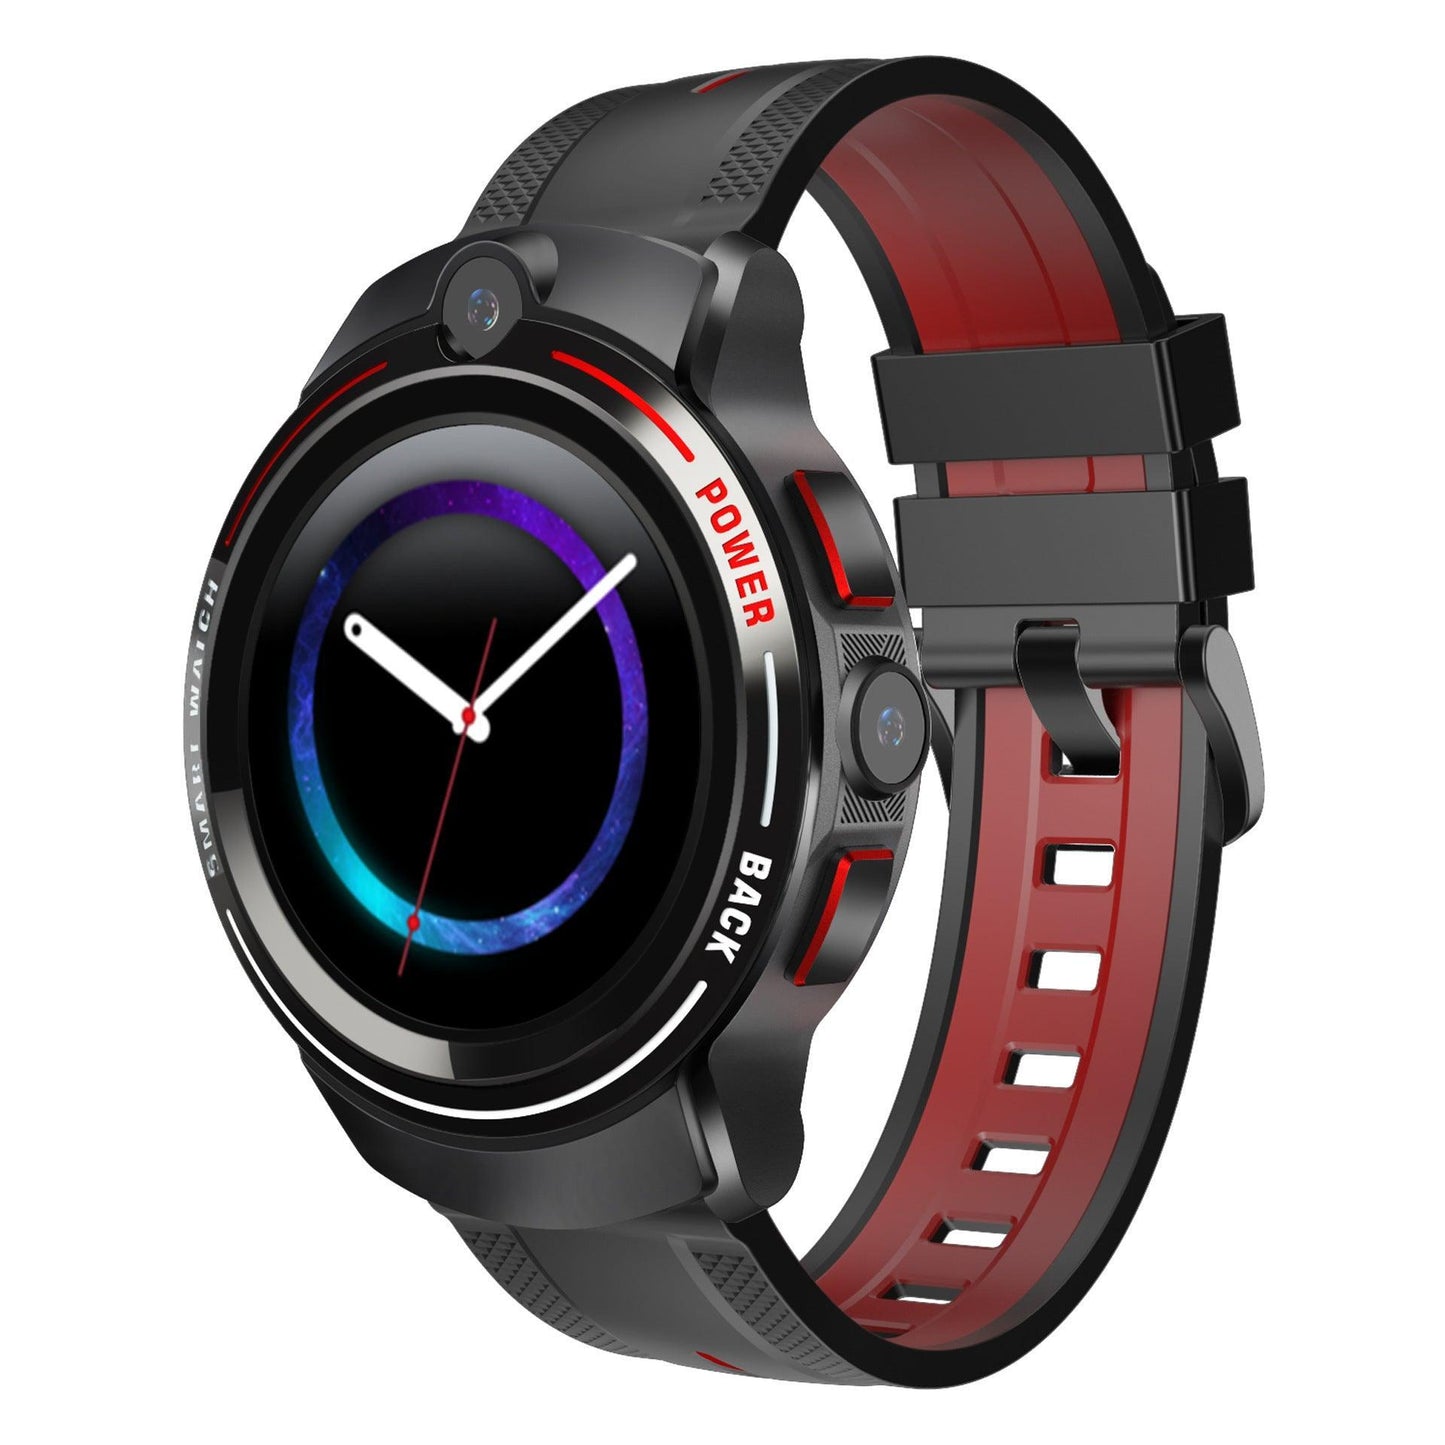 High-end Dual Camera Smartwatch - ForVanity men's jewellery & watches, smart watches Smartwatches